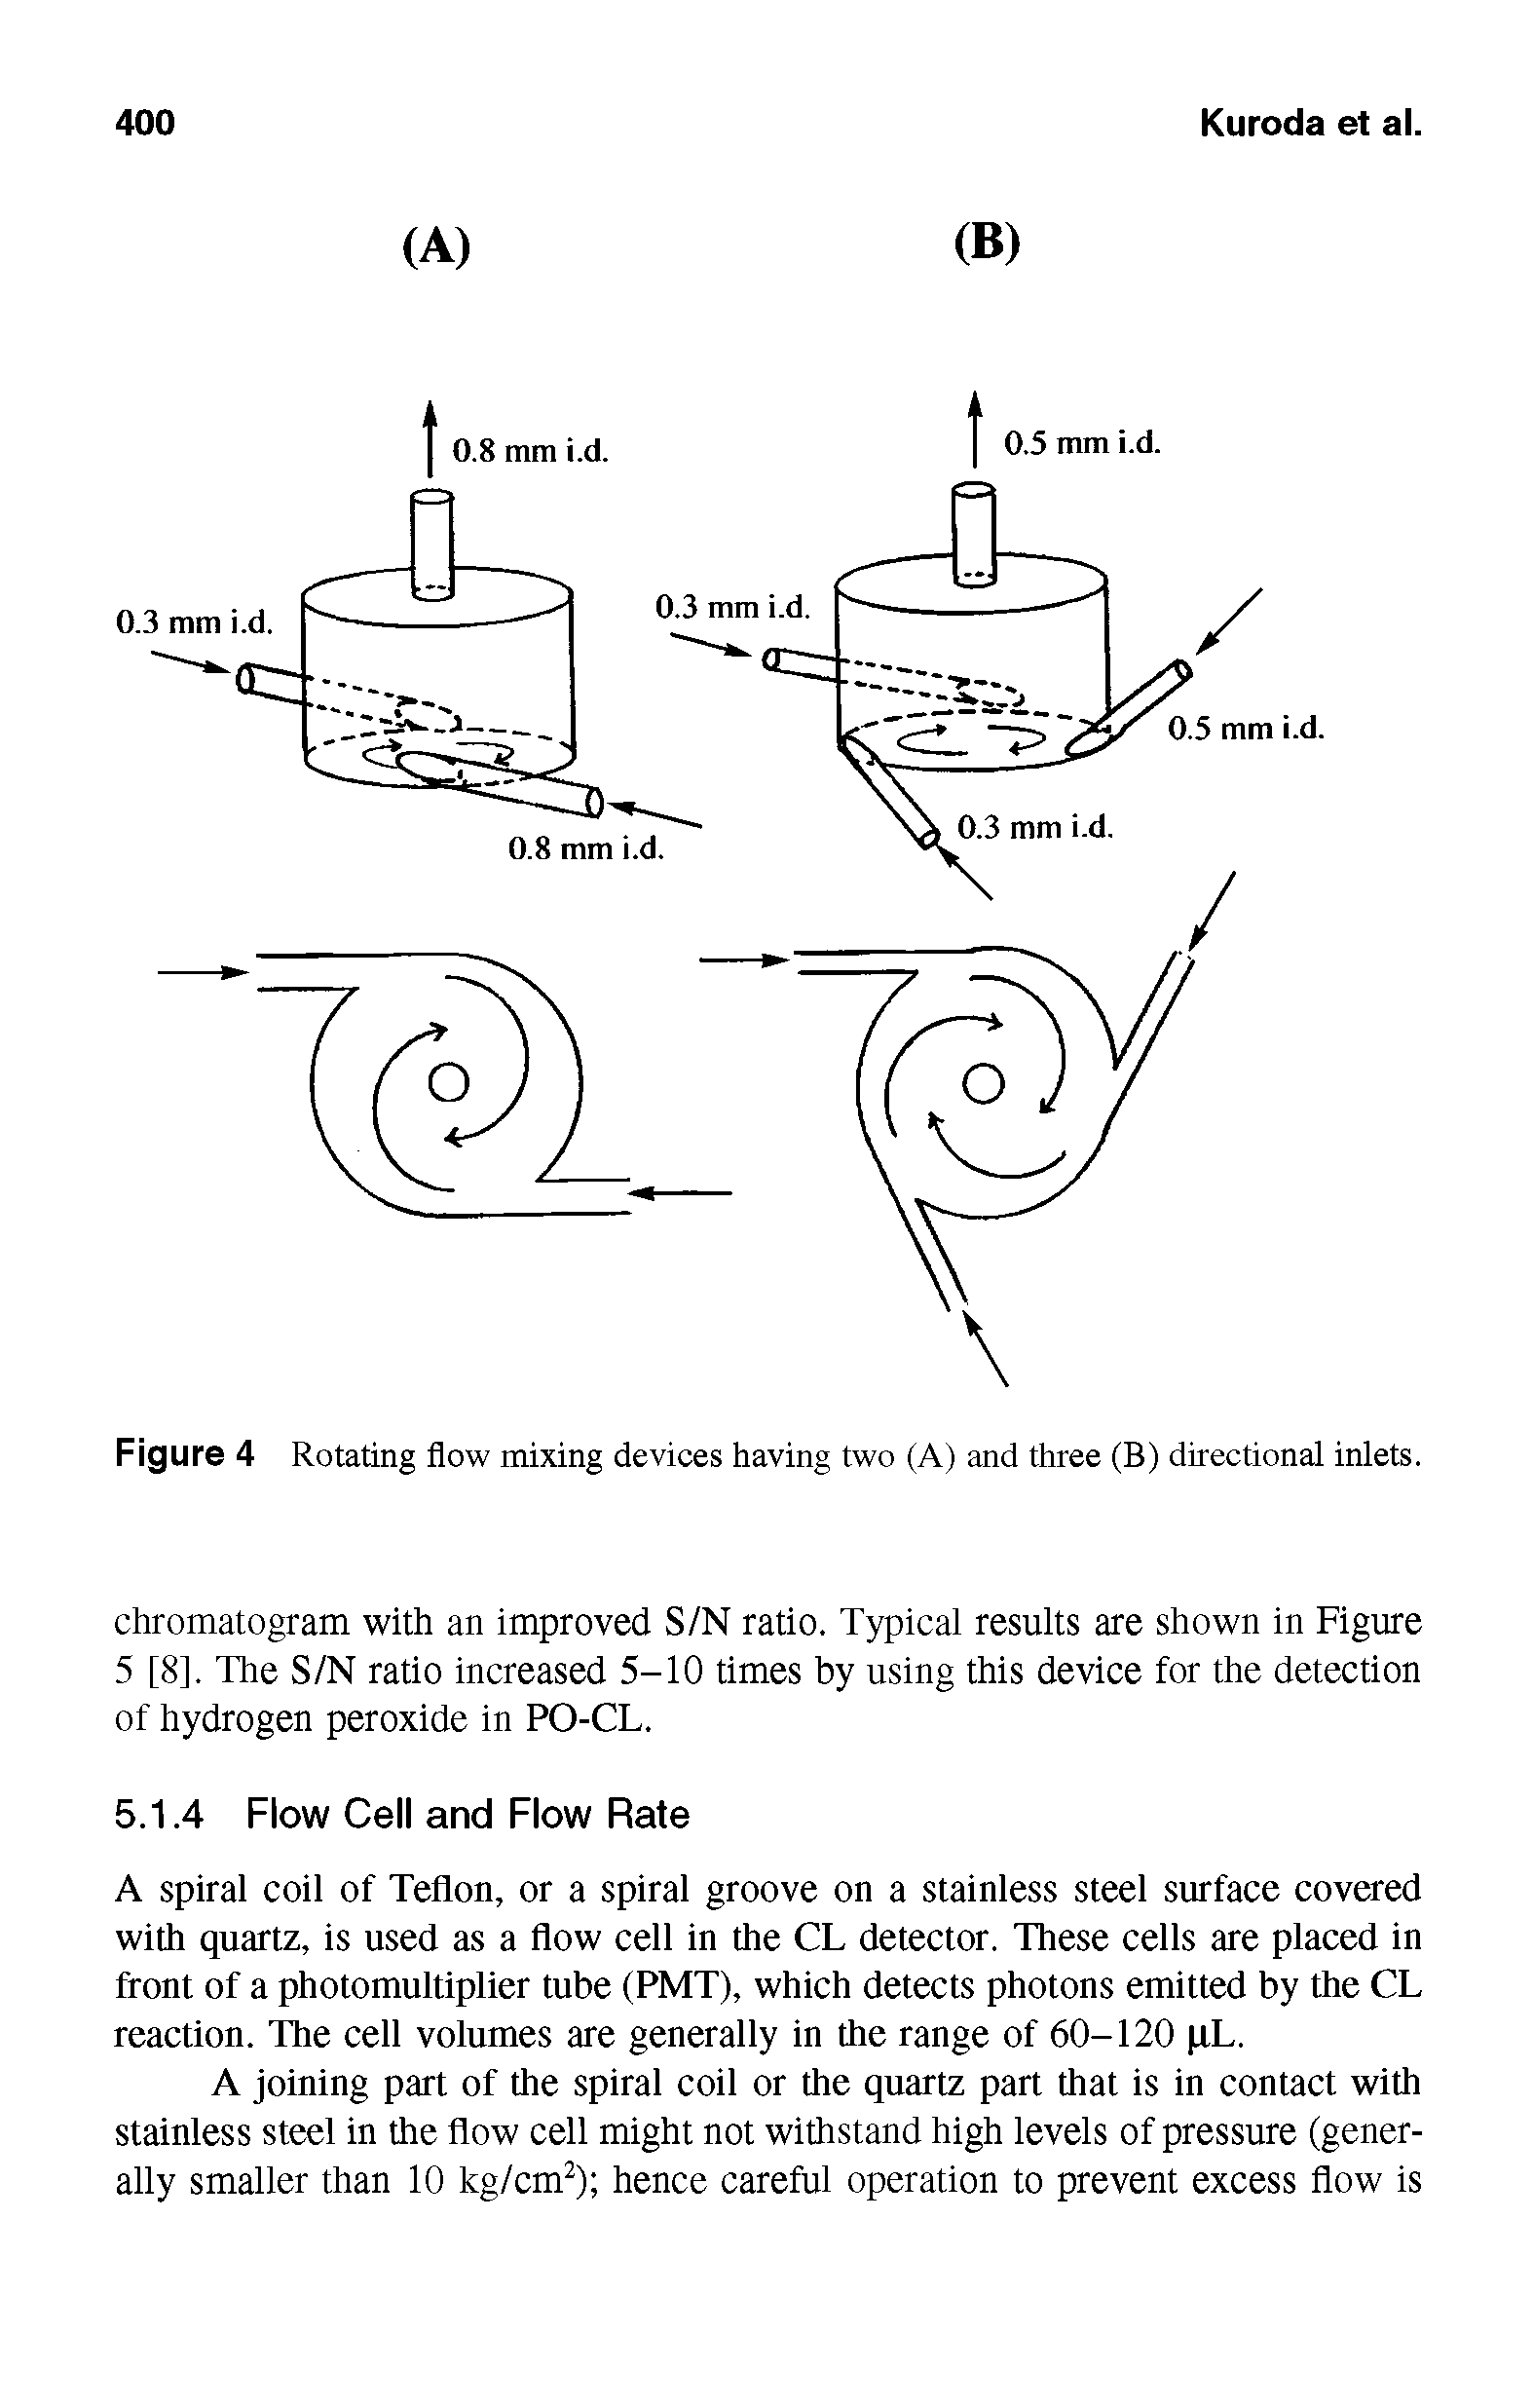 Figure 4 Rotating flow mixing devices having two (A) and three (B) directional inlets.